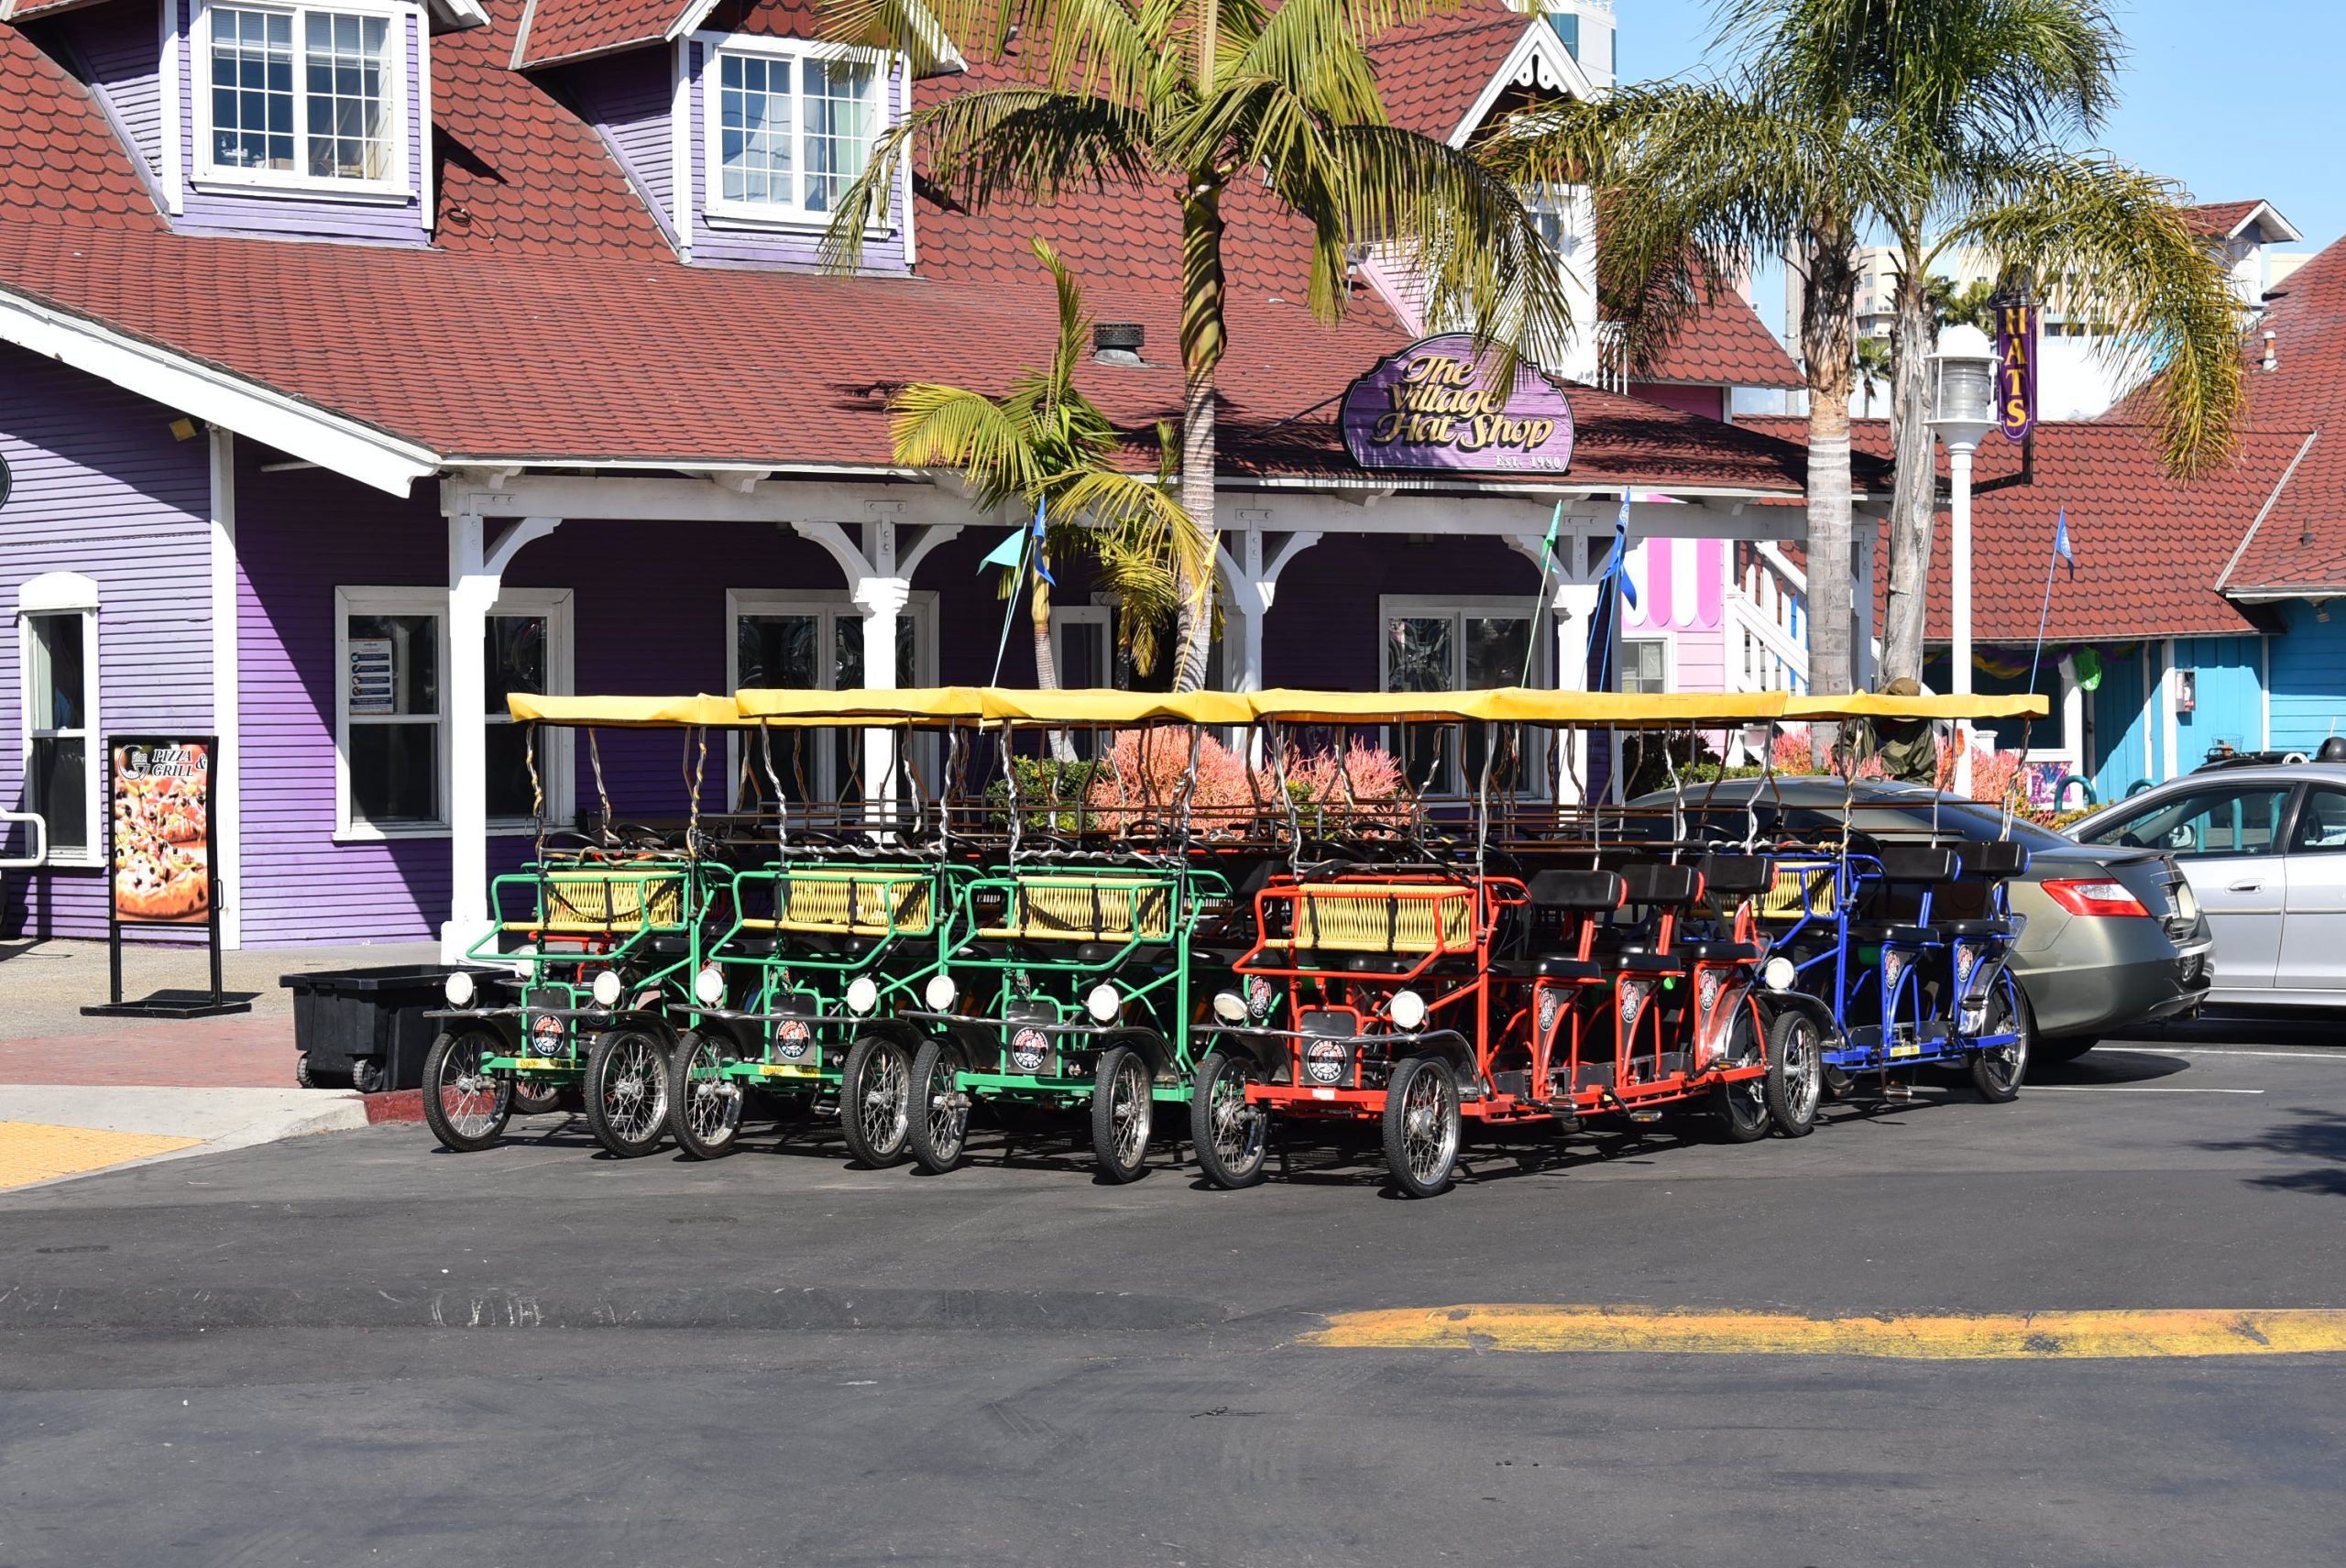 Wheel Fun Rentals gives locals and tourists the opportunity to ride in quadricycles around the area.